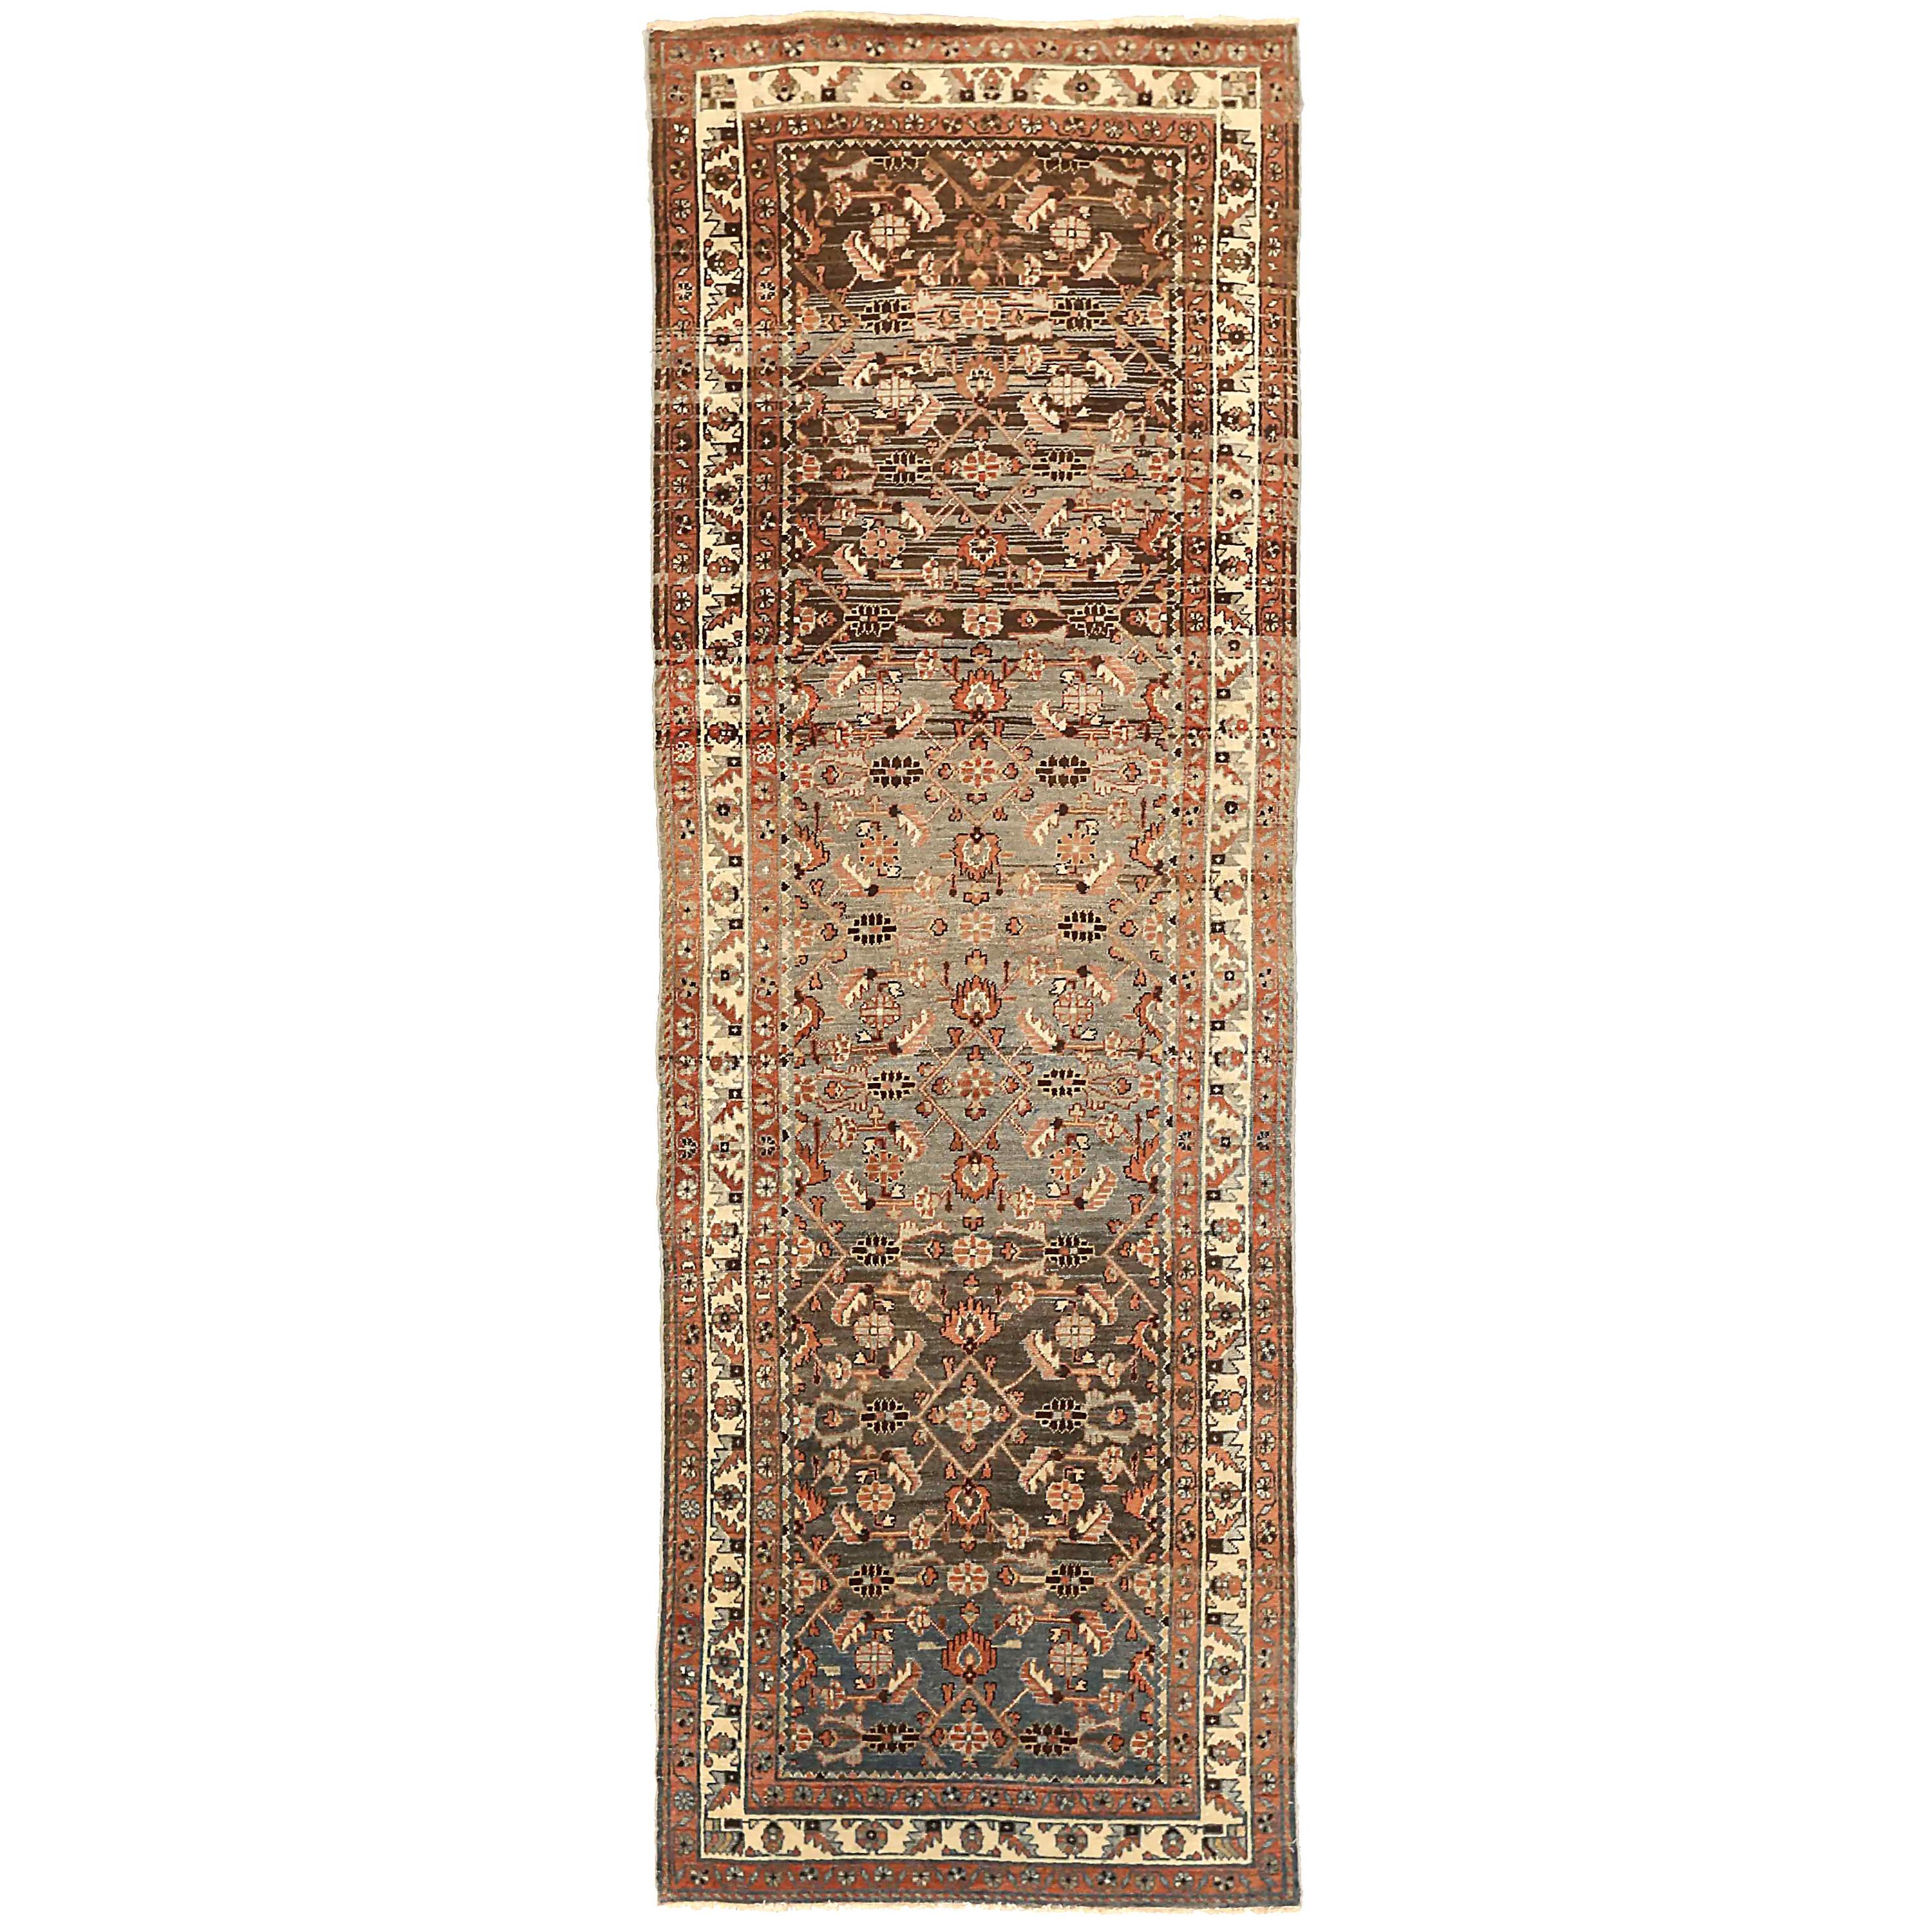 Antique Persian Malayer Runner Rug with Botanical & Tribal Design